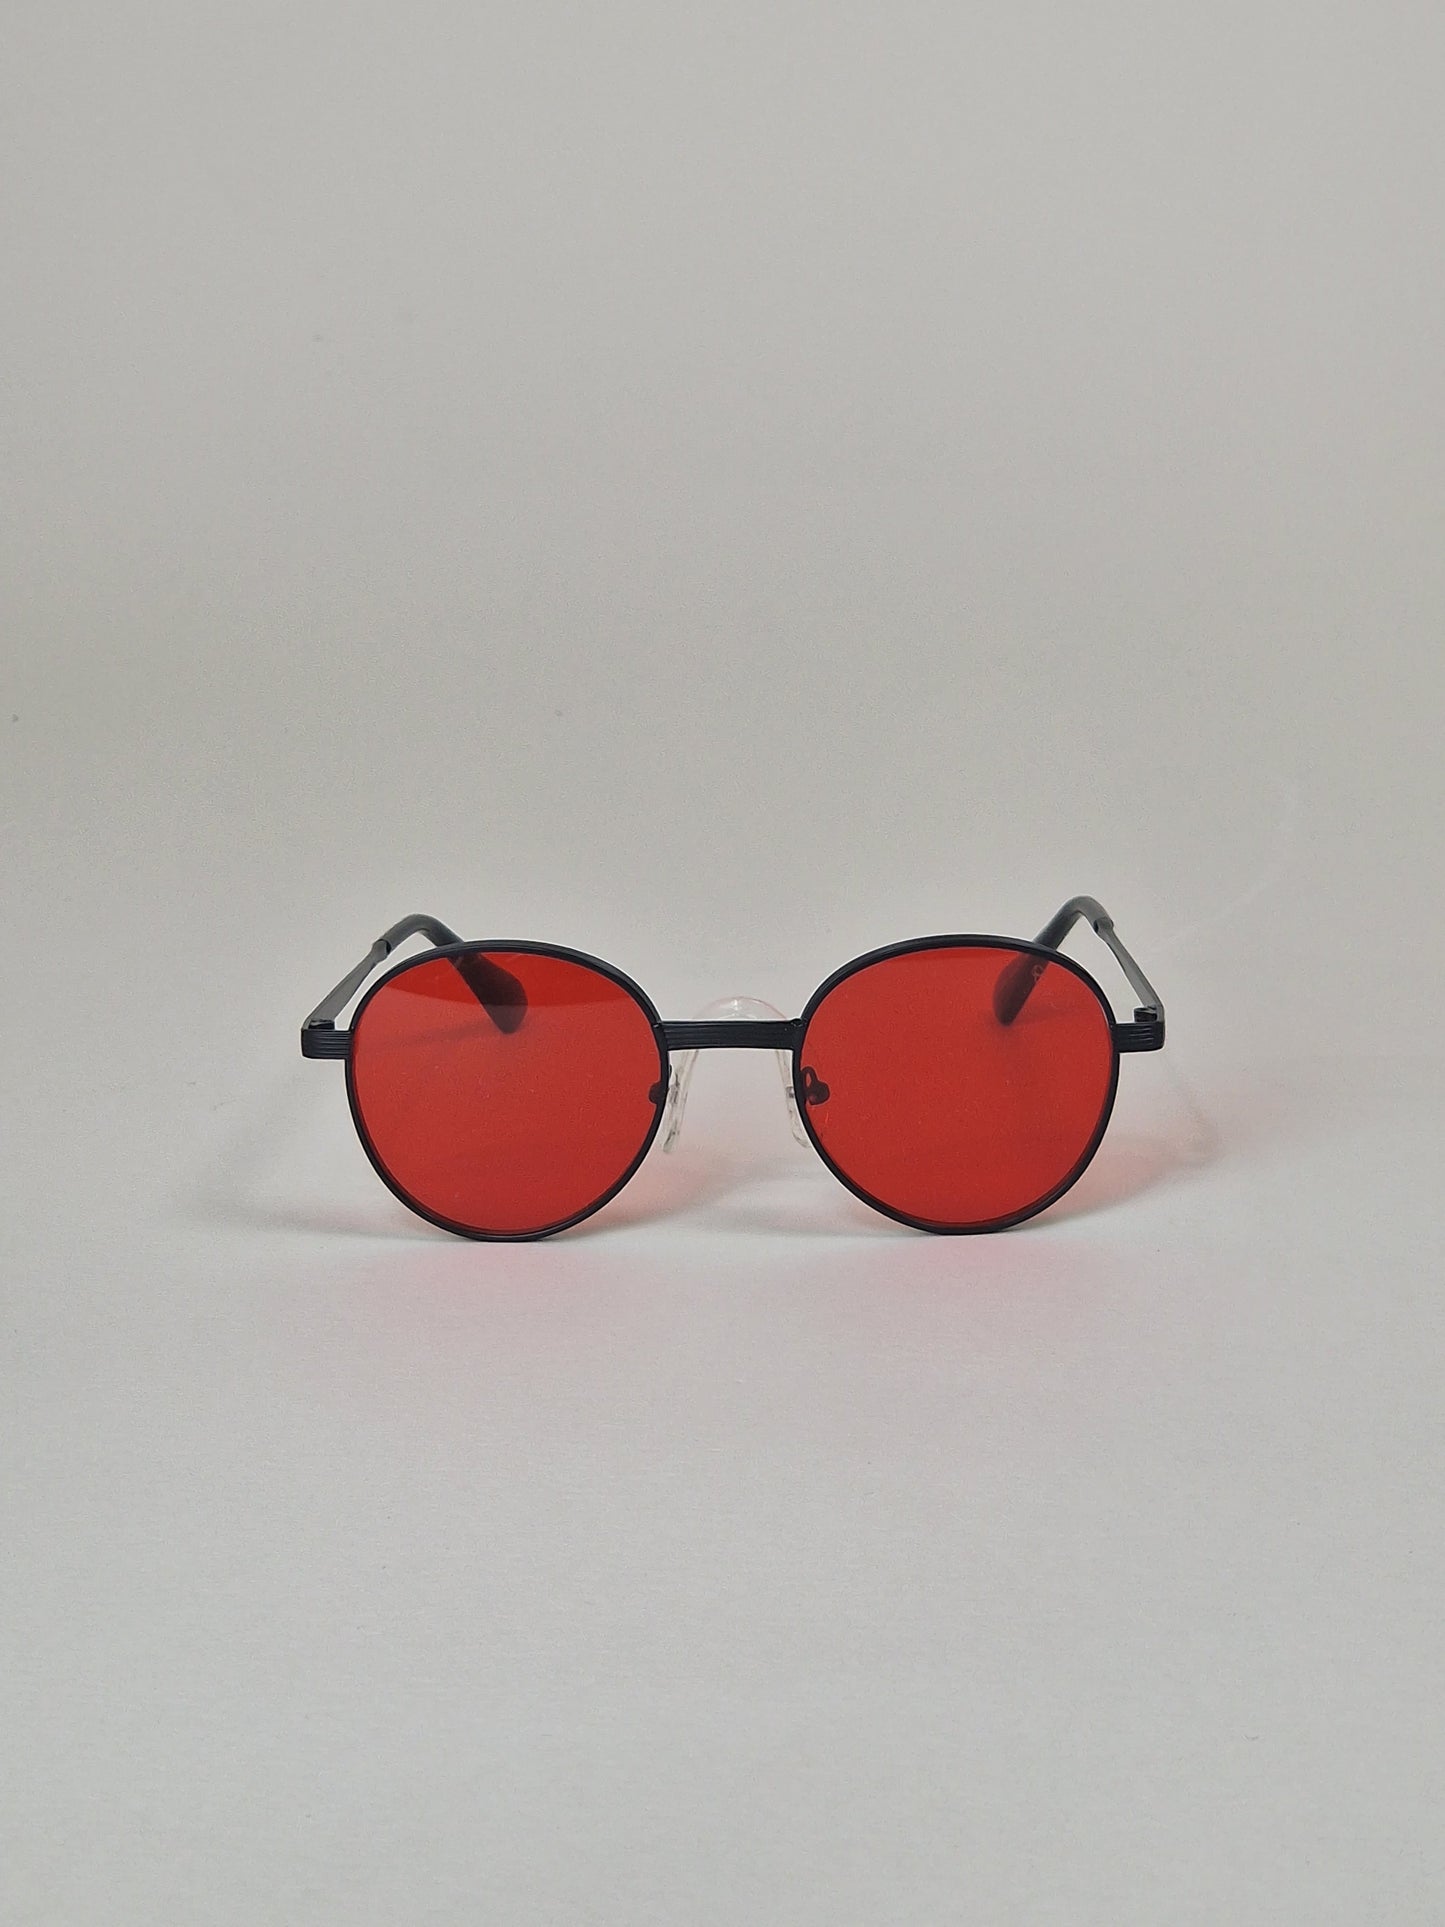 Sunglasses, model 25 - Red tinted.